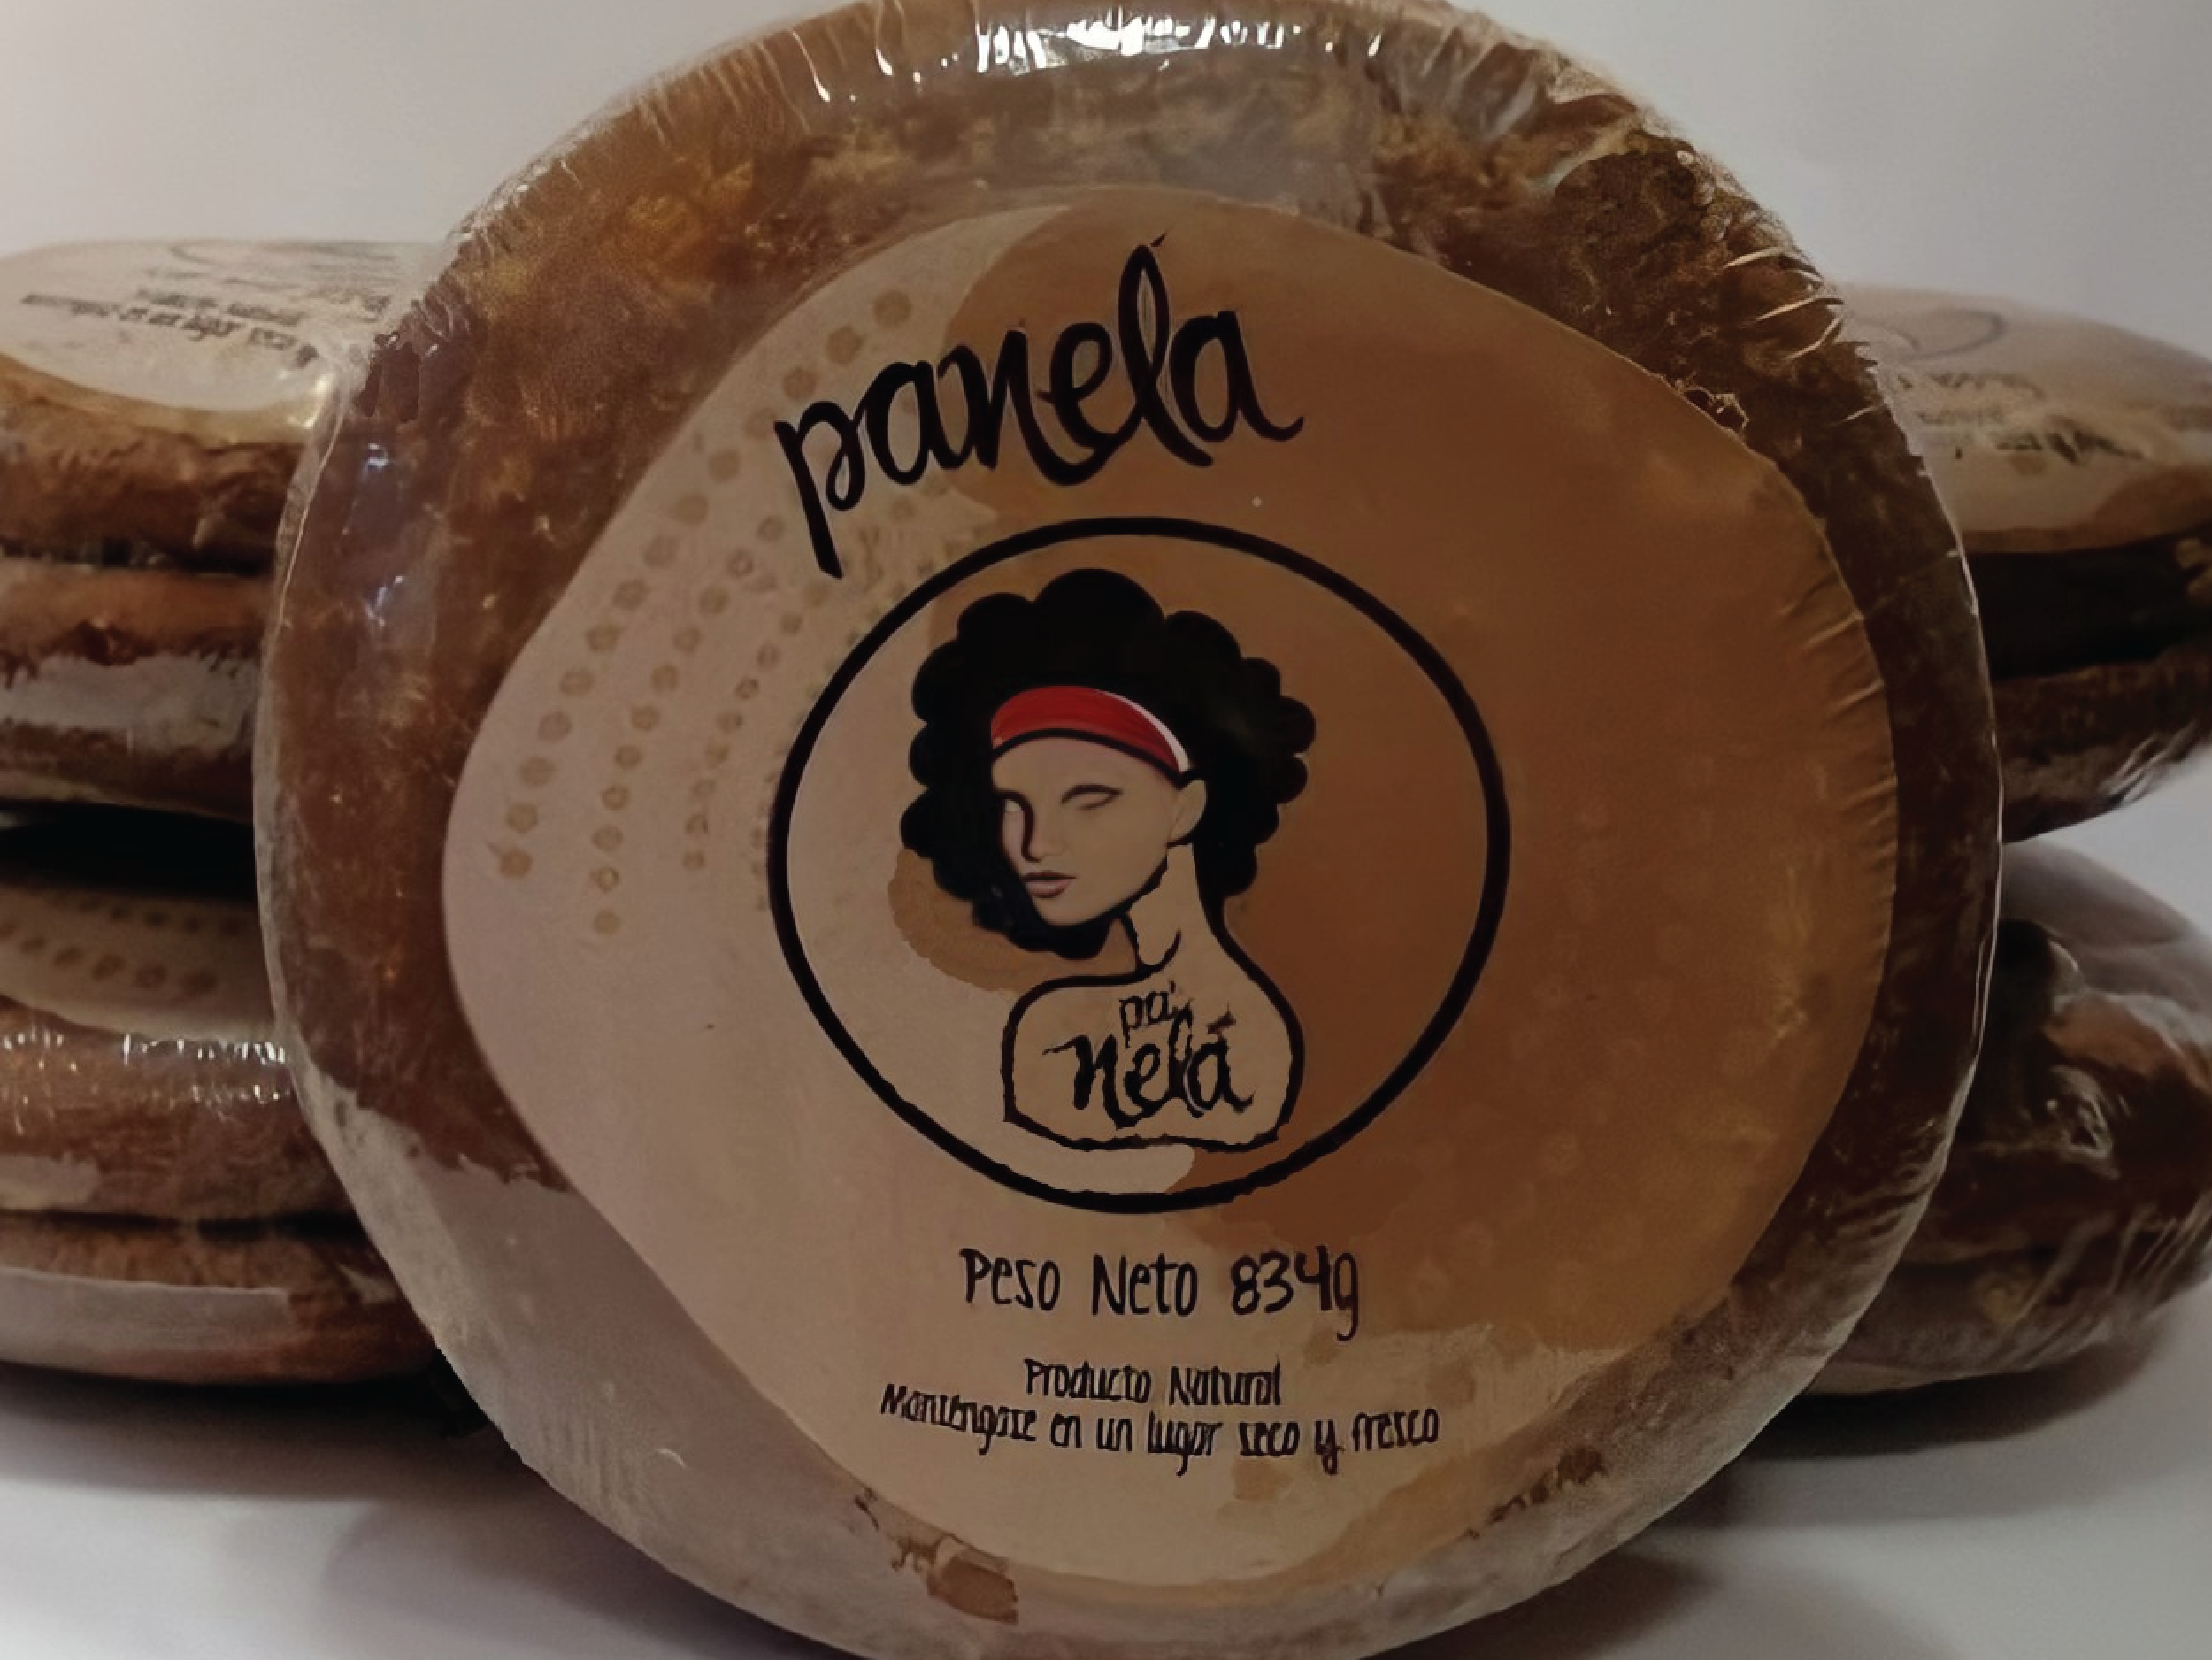 Panela: Challenges and Opportunities